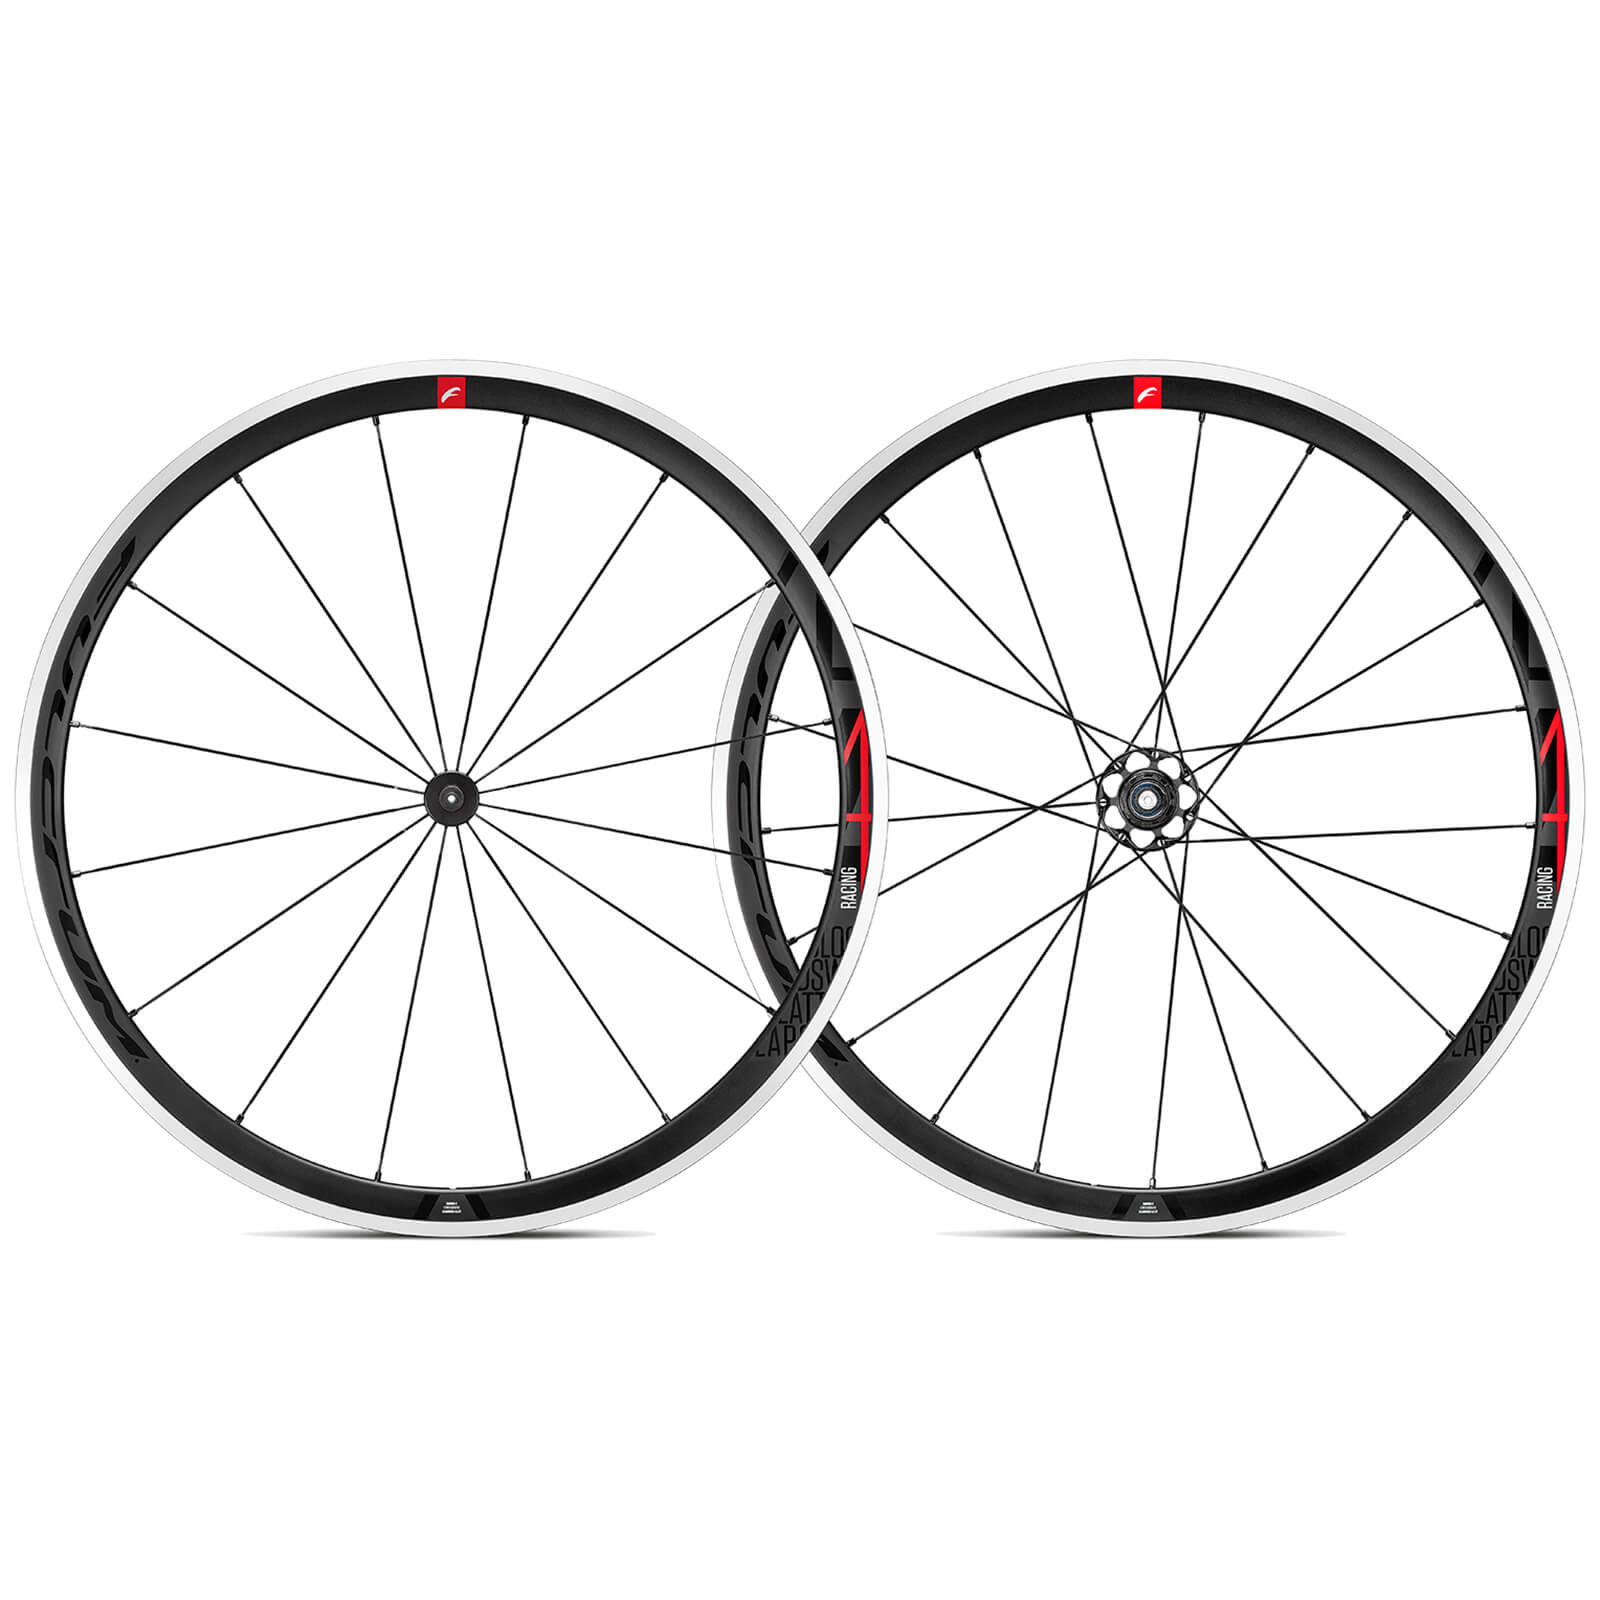 Image of Fulcrum Racing 4 C17 Clincher Road Wheelset - Black / Campagnolo / Pair / 11-12 Speed / Clincher / 700c